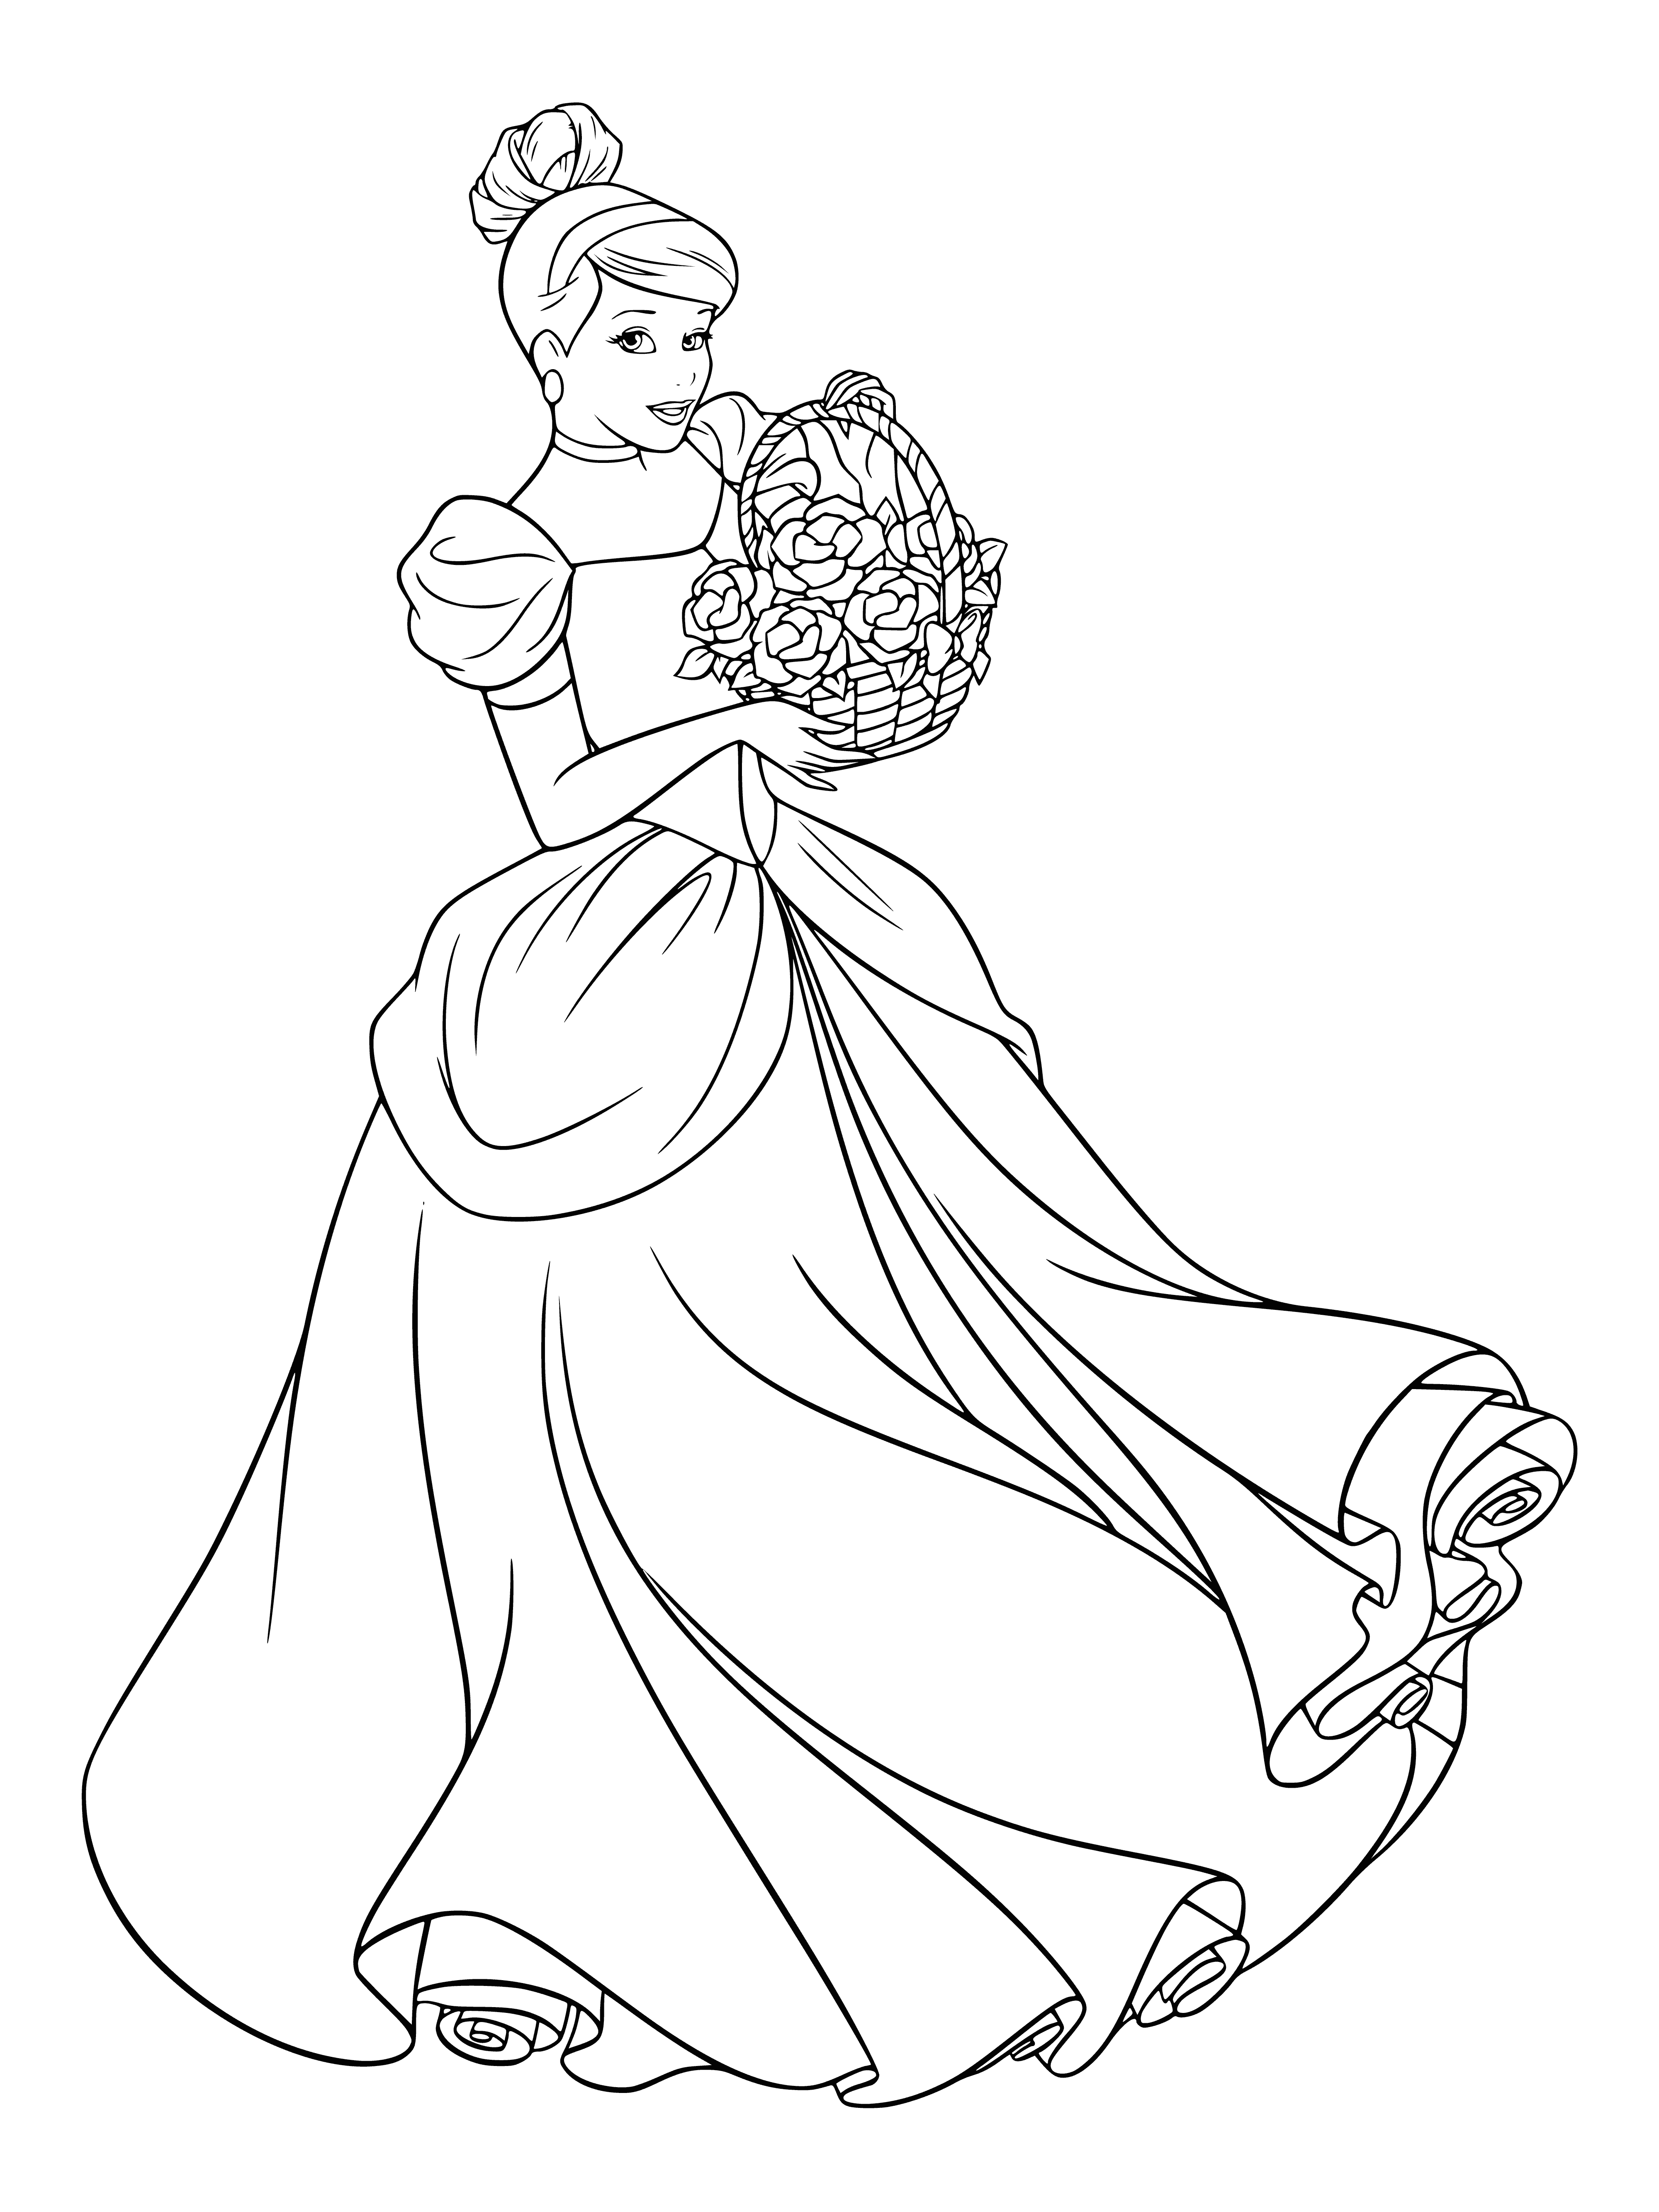 coloring page: Cinderella stands in front of a castle with a basket of flowers, wearing a blue dress and white headband. #DisneyPrincess